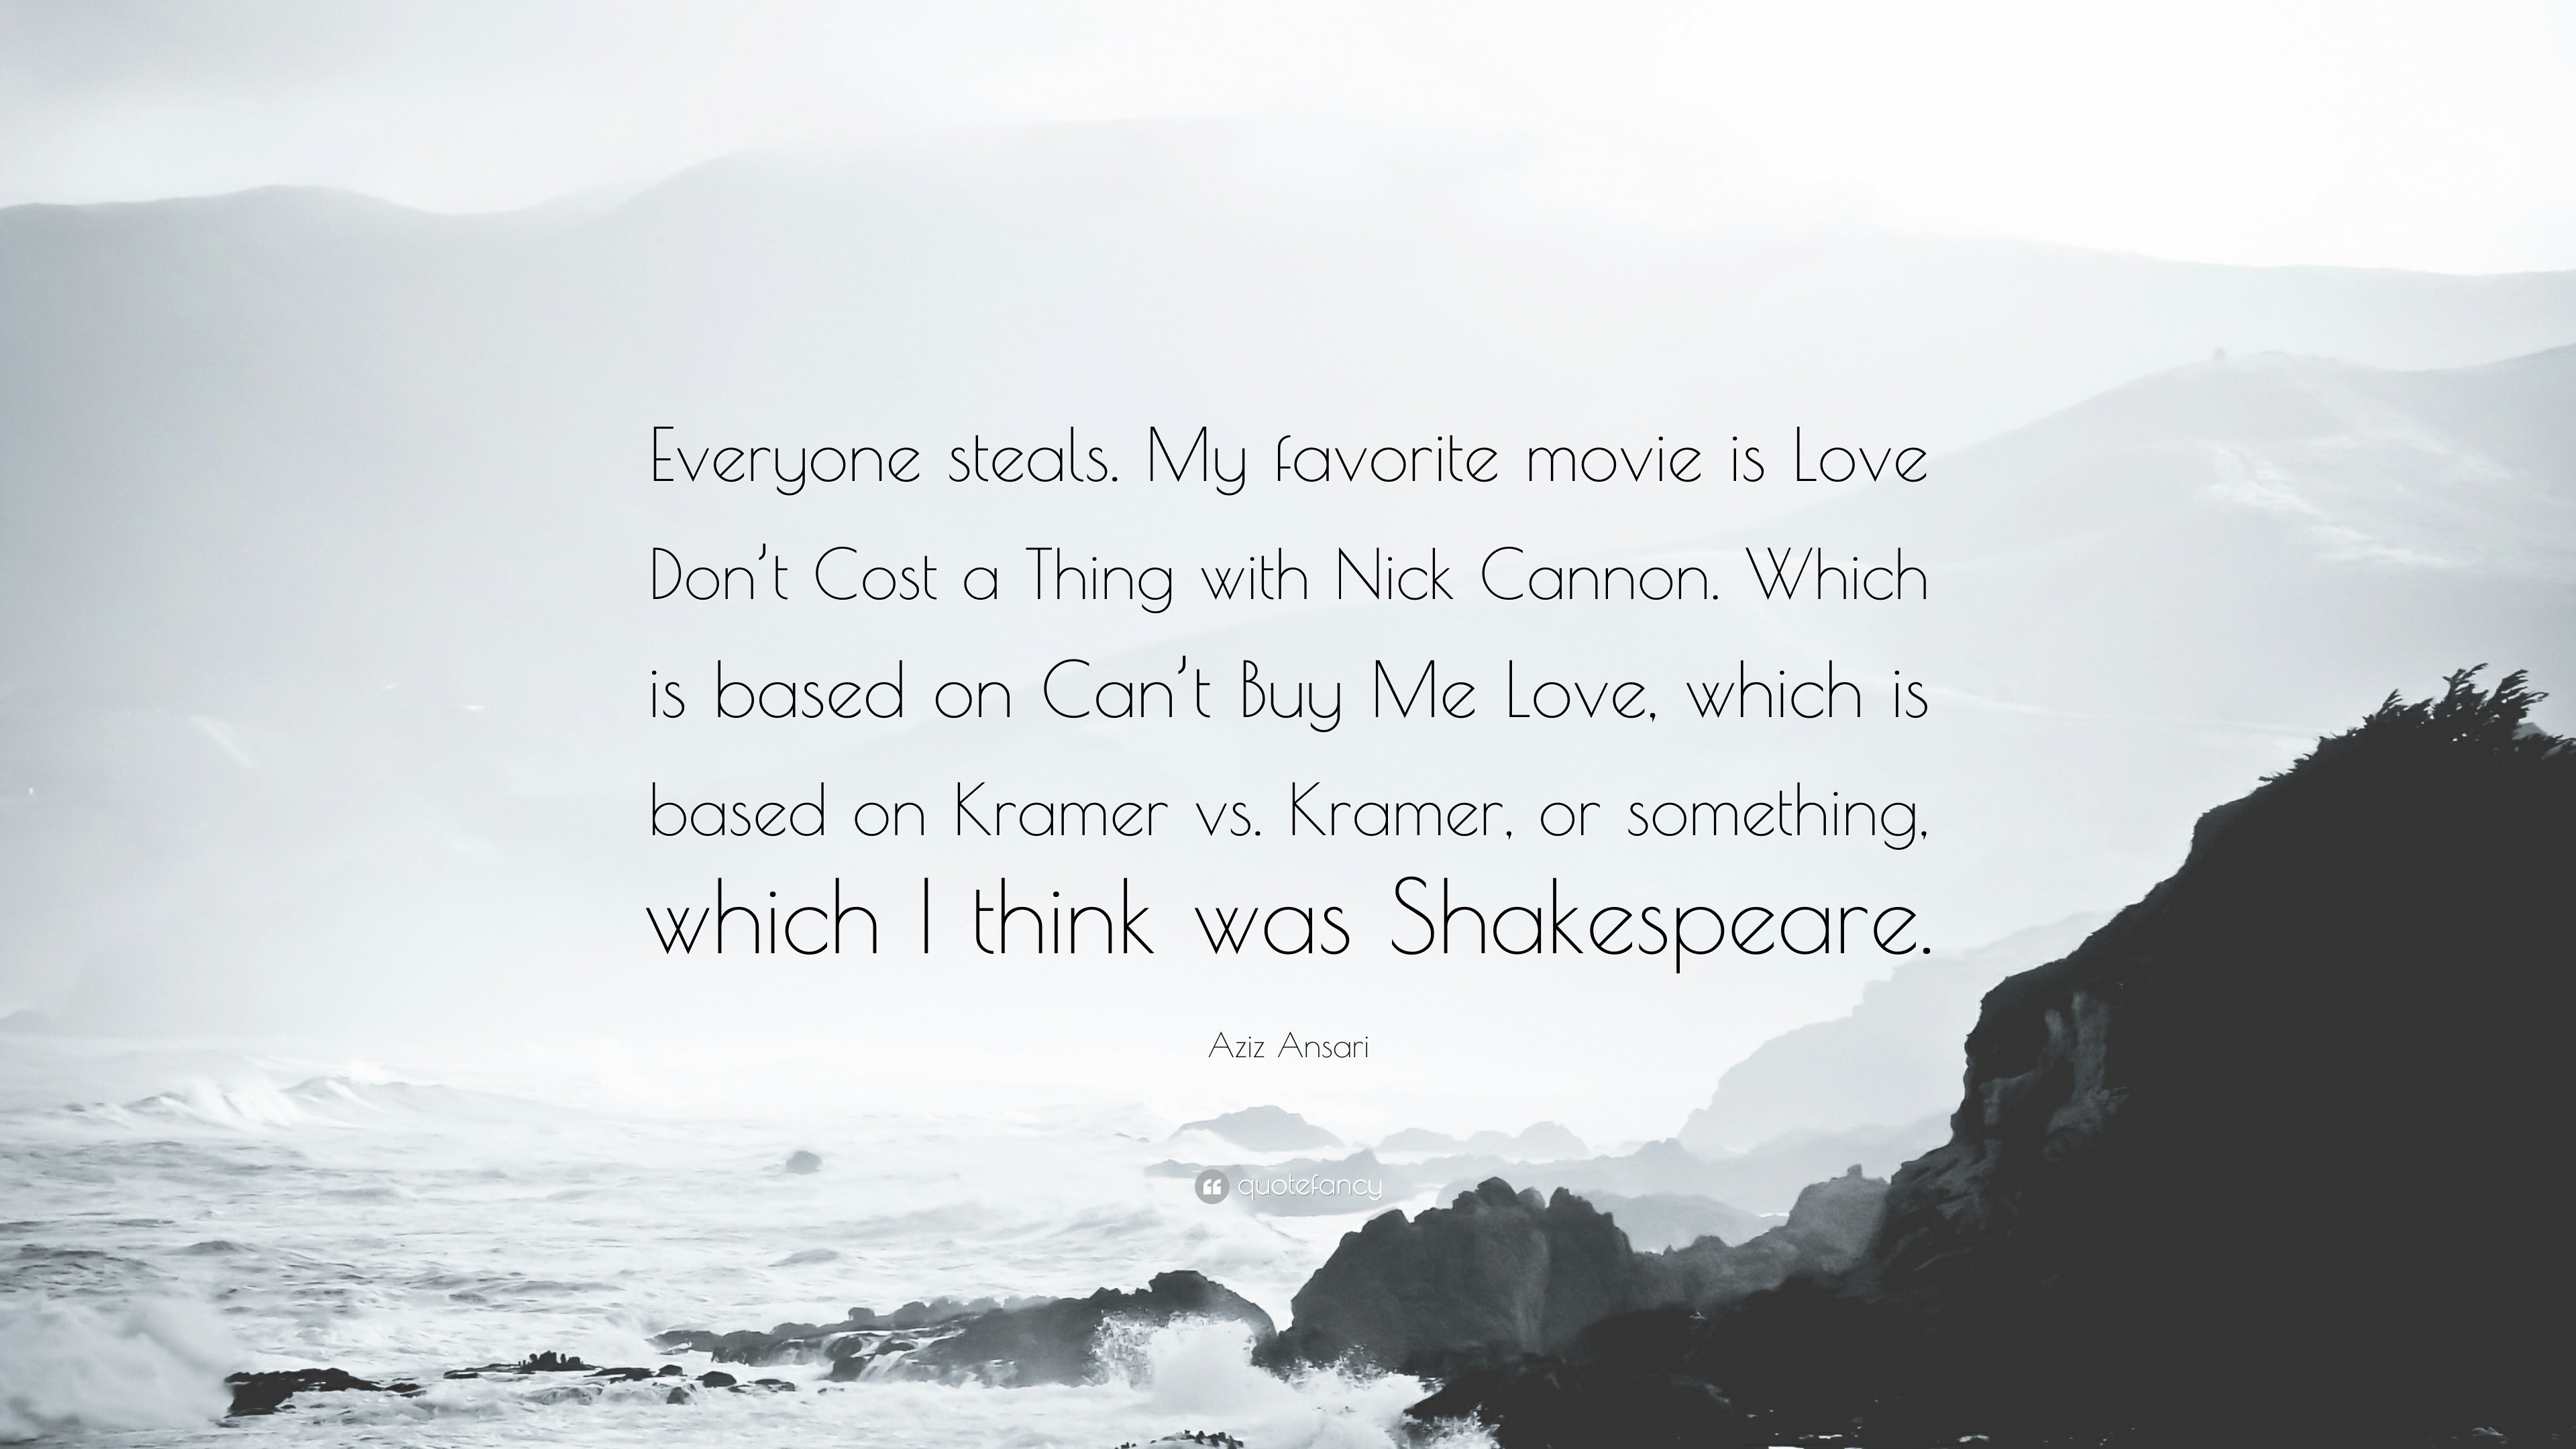 Aziz Ansari Quote “Everyone steals My favorite movie is Love Don t